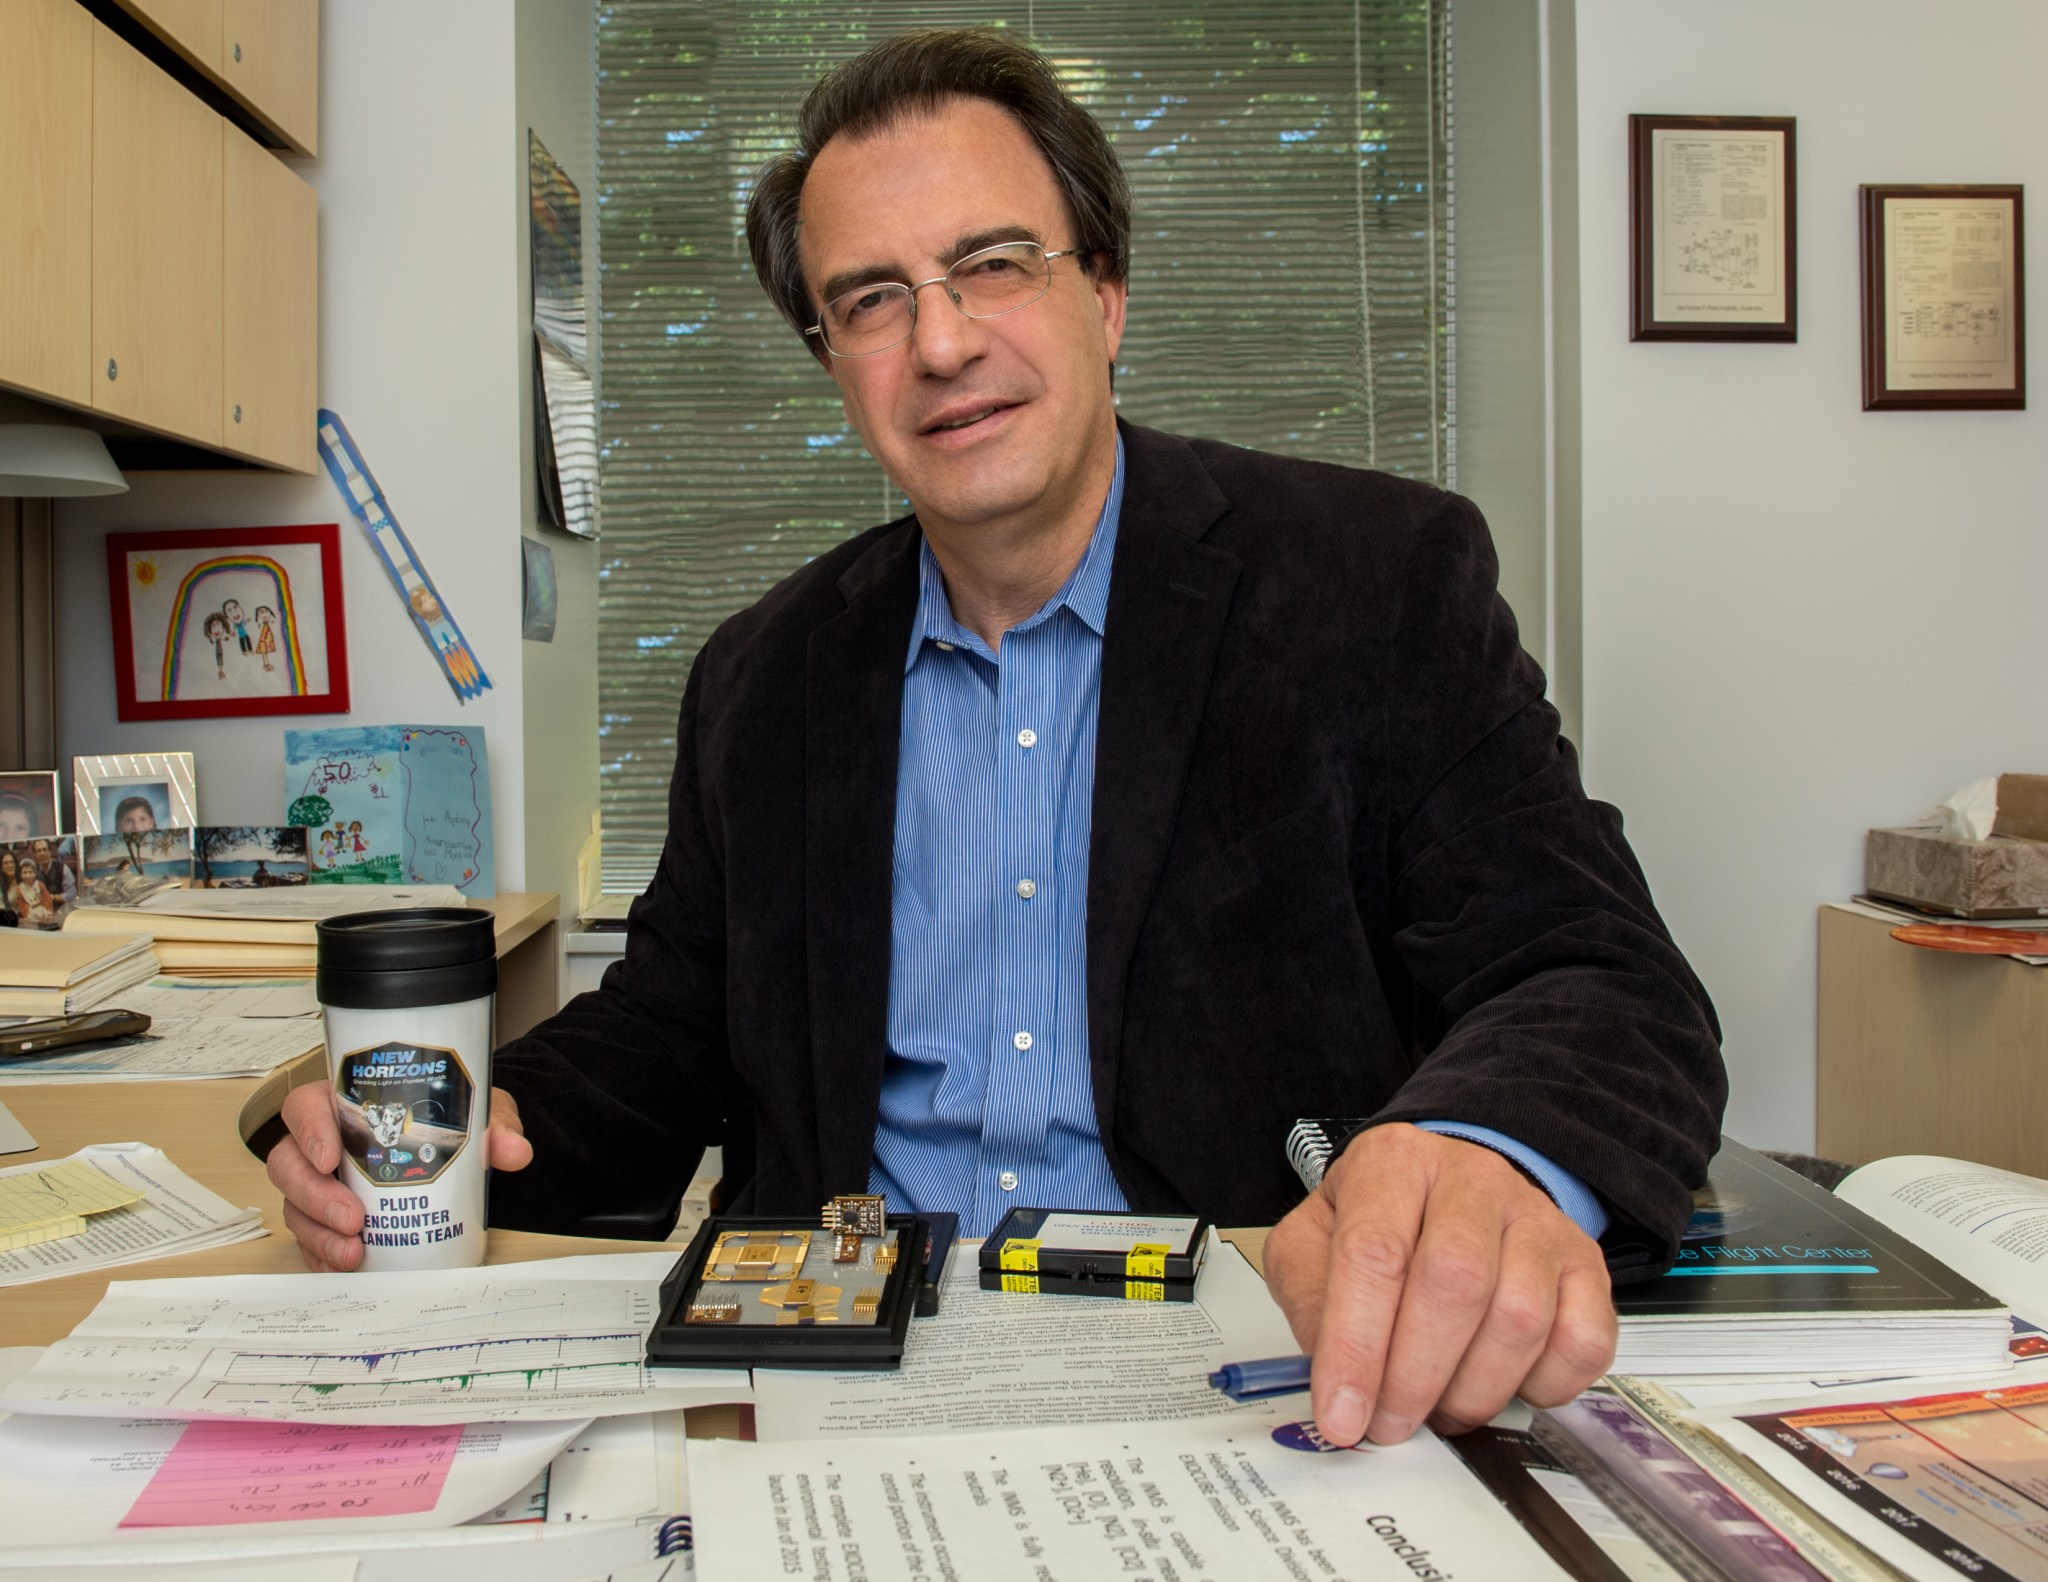 Nikolaos Paschalidis sits at a desk in an office, facing the camera. In one hand he holds a mug with the New Horizons mission logo on it.